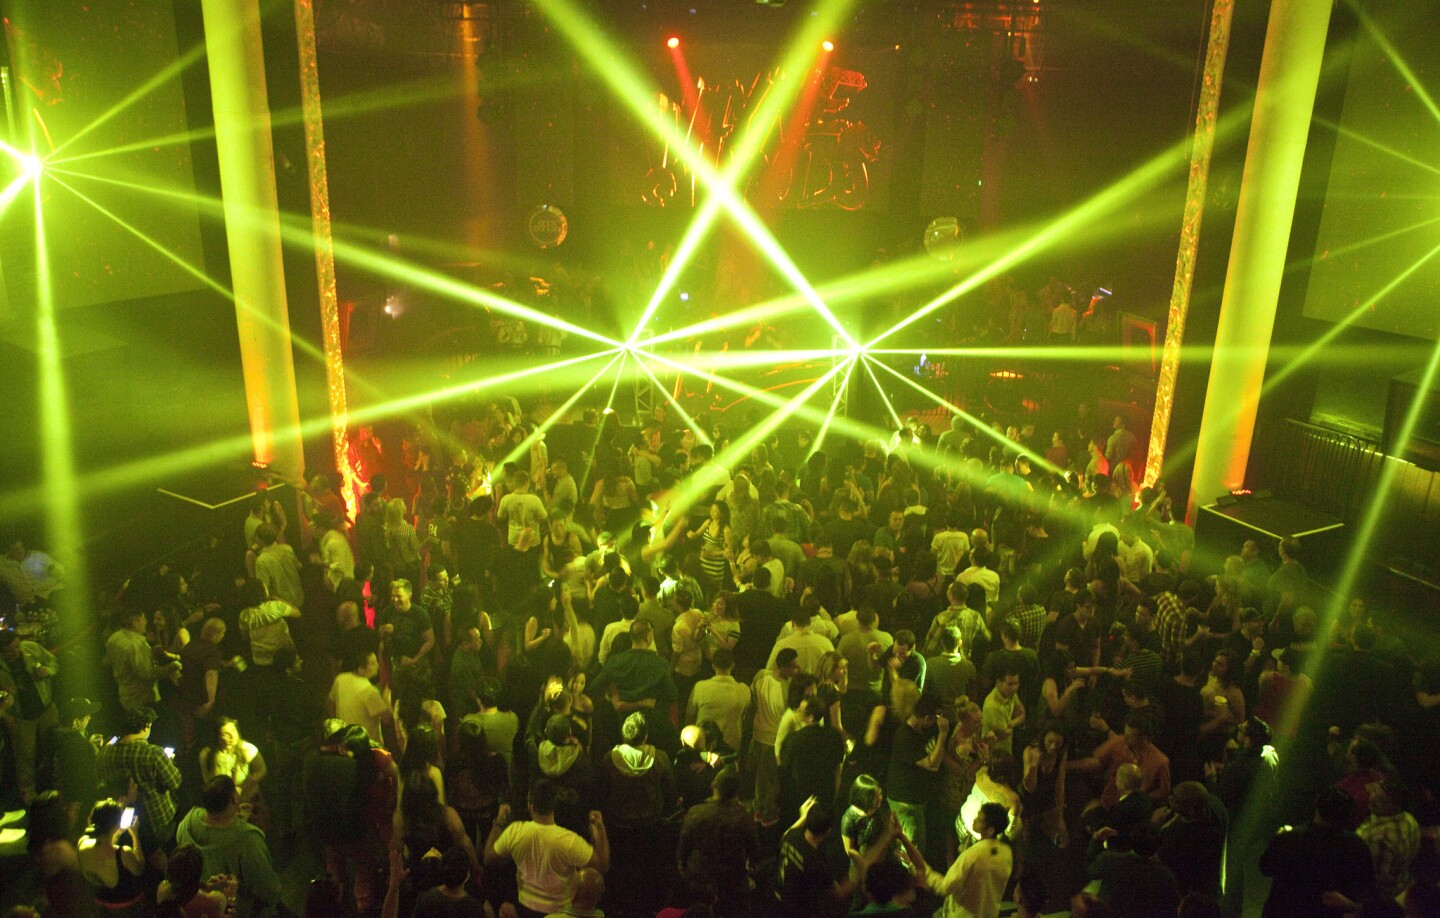 Avalon Hollywood, a fixture on the electronic dance music scene since its opening in 2003 in the old Palace space, has undergone a substantial renovation that includes a new sound system. The building dates from the 1920s. Here, patrons dance in during the main event of the club's Grand Reveal series marking its transformation on May 10, 2014.